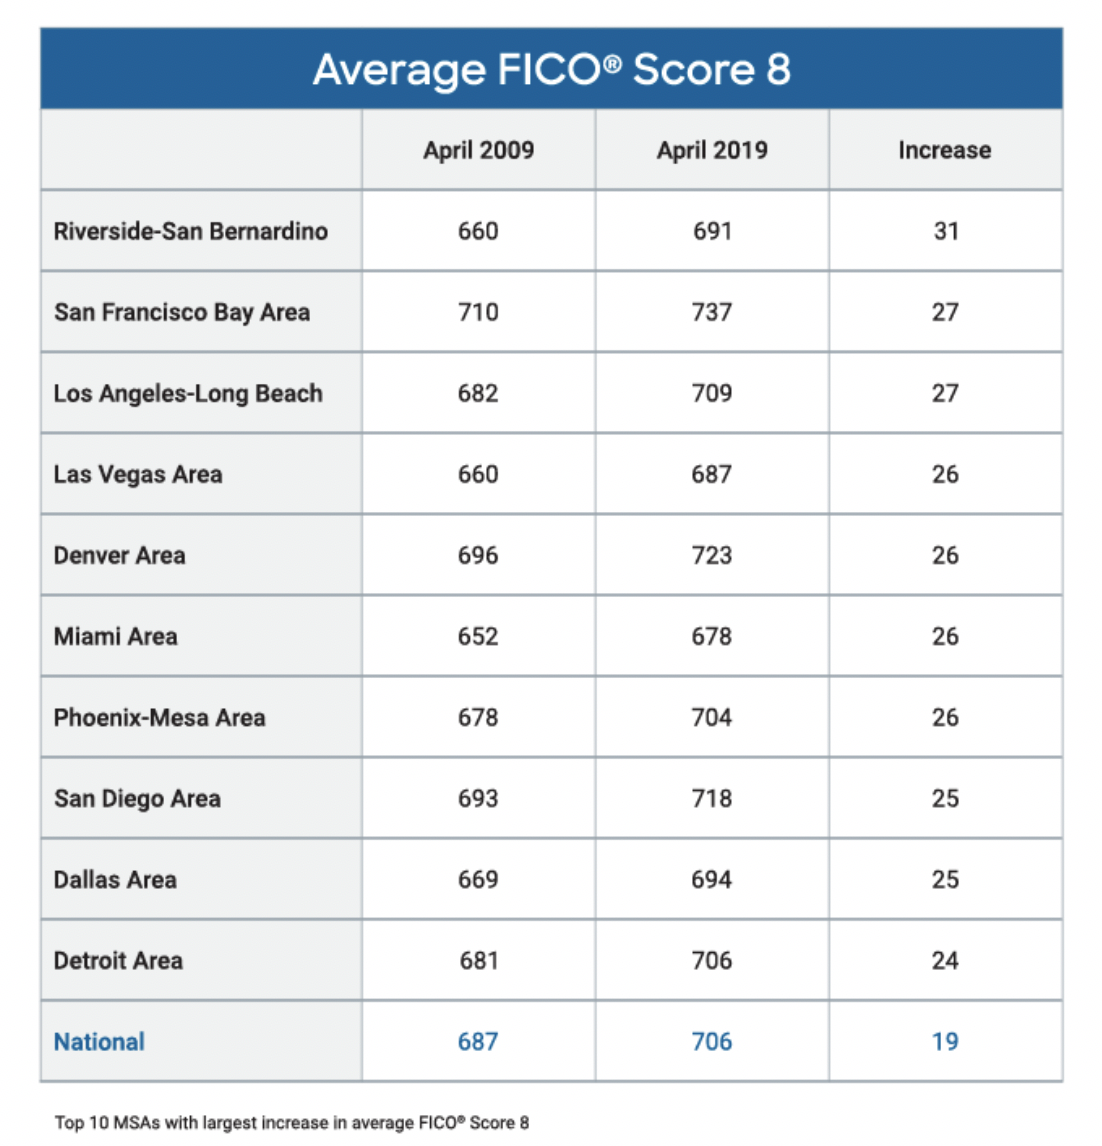 Top 10 MSAs with largest increase in FICO Scores